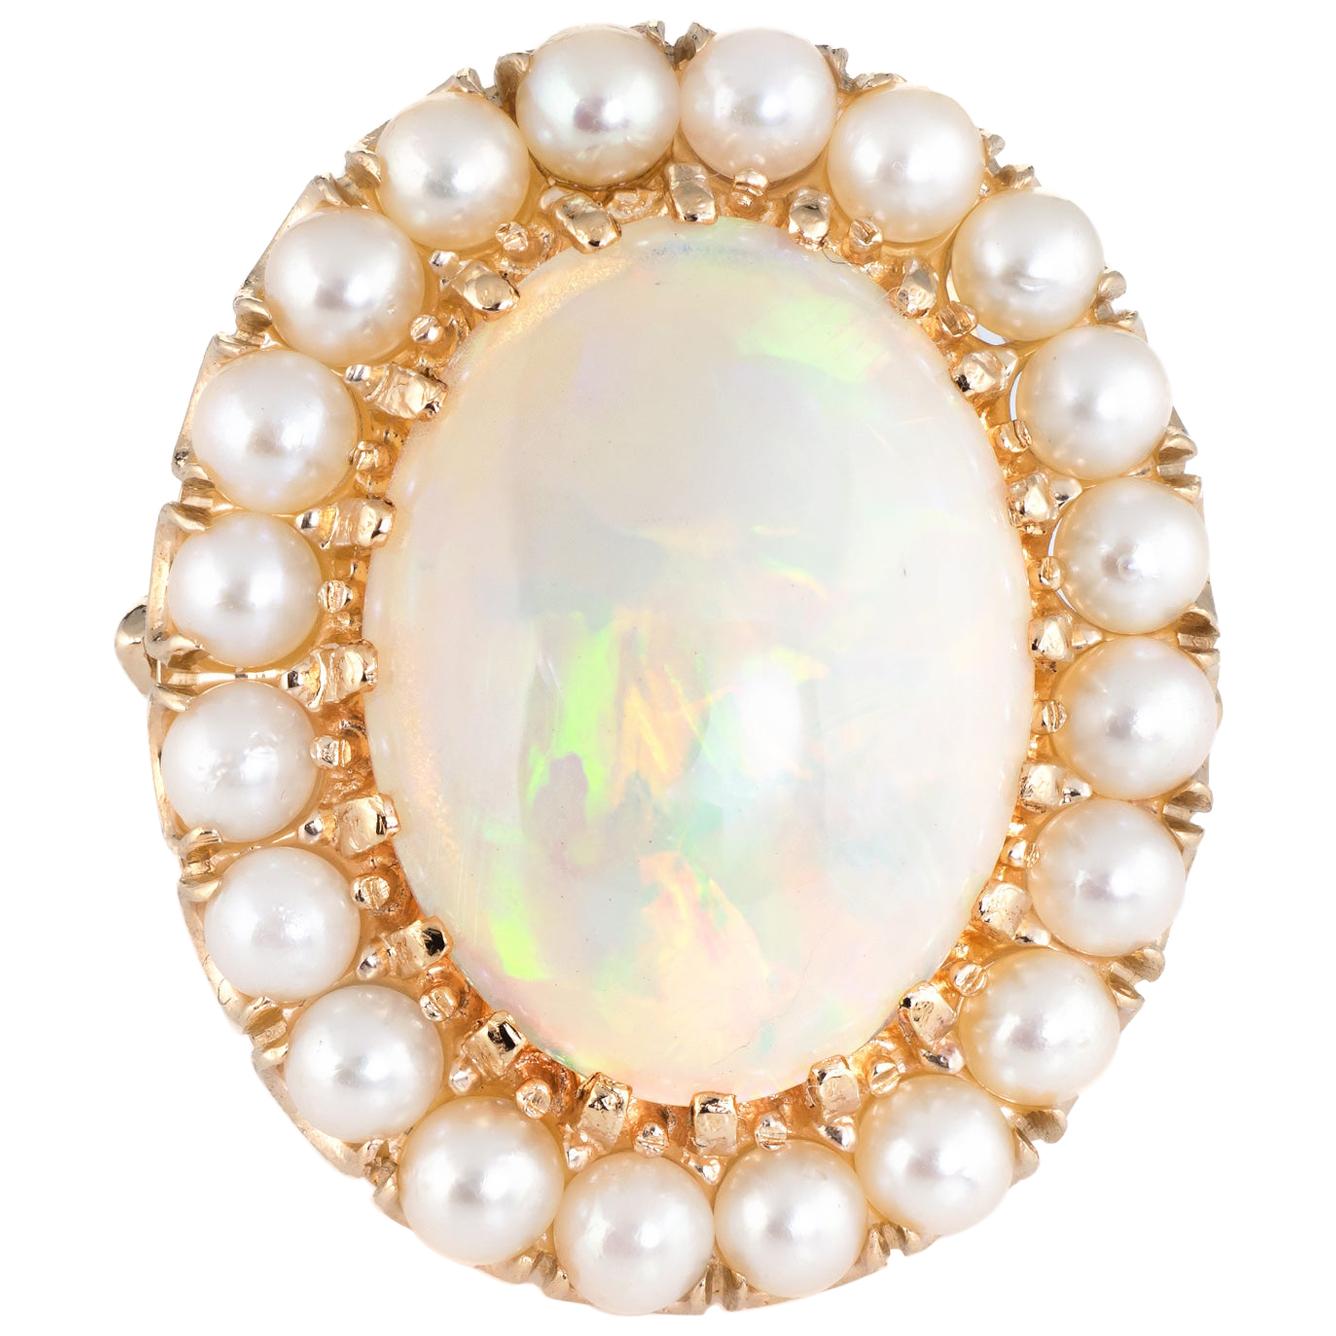 Vintage Opal Cultured Pearl Ring 14 Karat Gold Large Oval Cocktail Jewelry